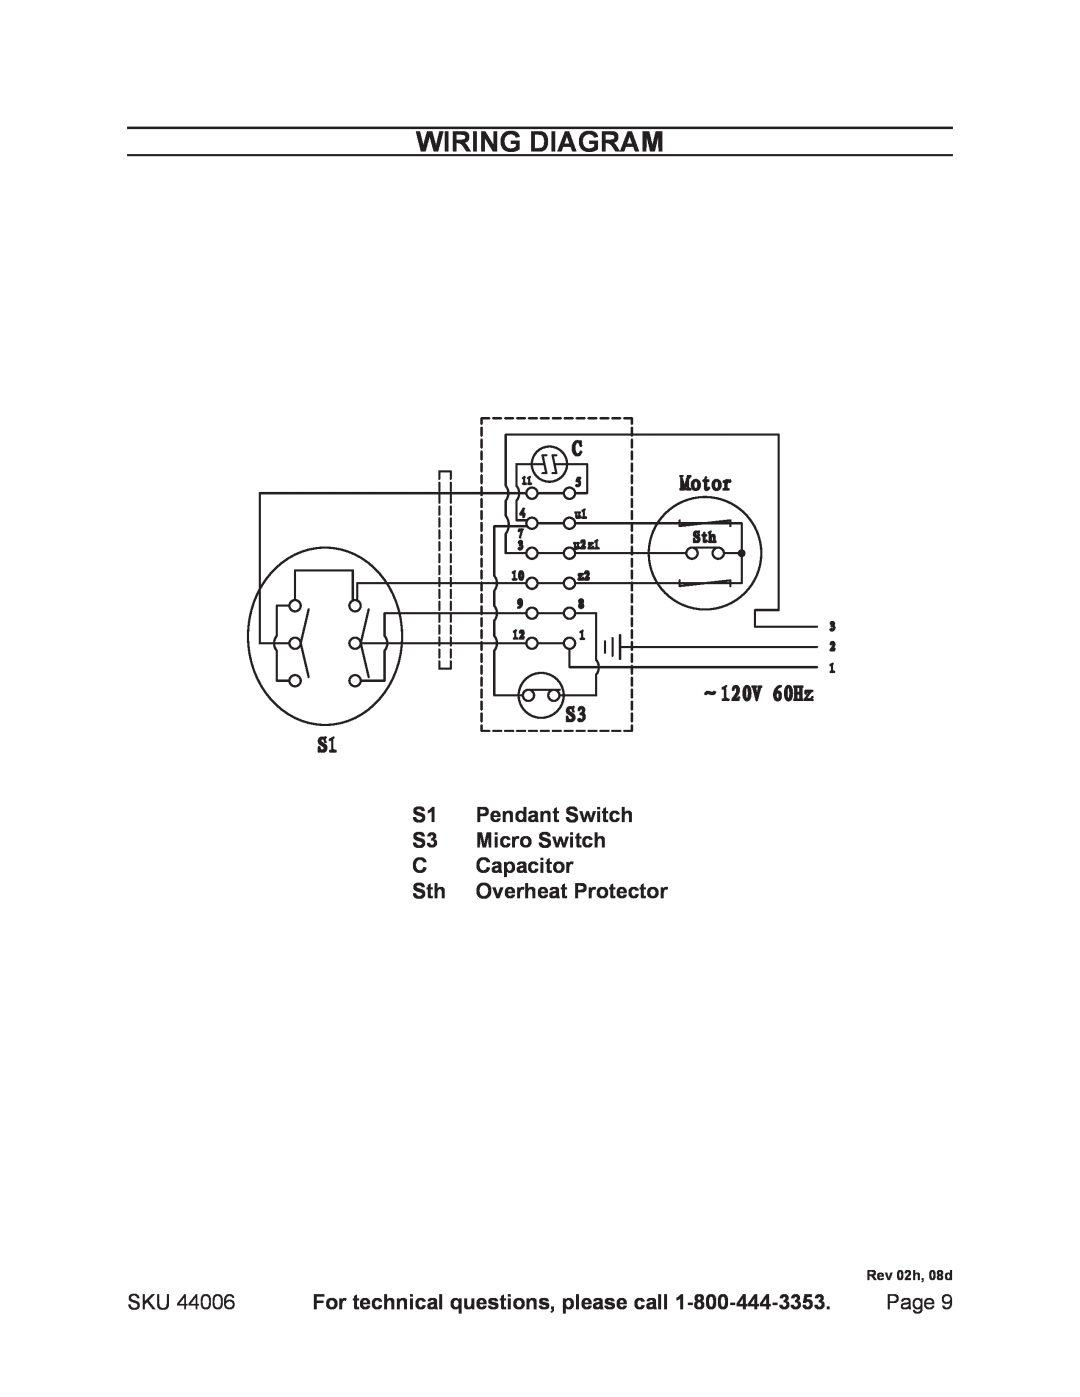 Chicago Electric 44006 Wiring Diagram, Pendant Switch, Micro Switch, Capacitor, Overheat Protector, Rev 02h, 08d 